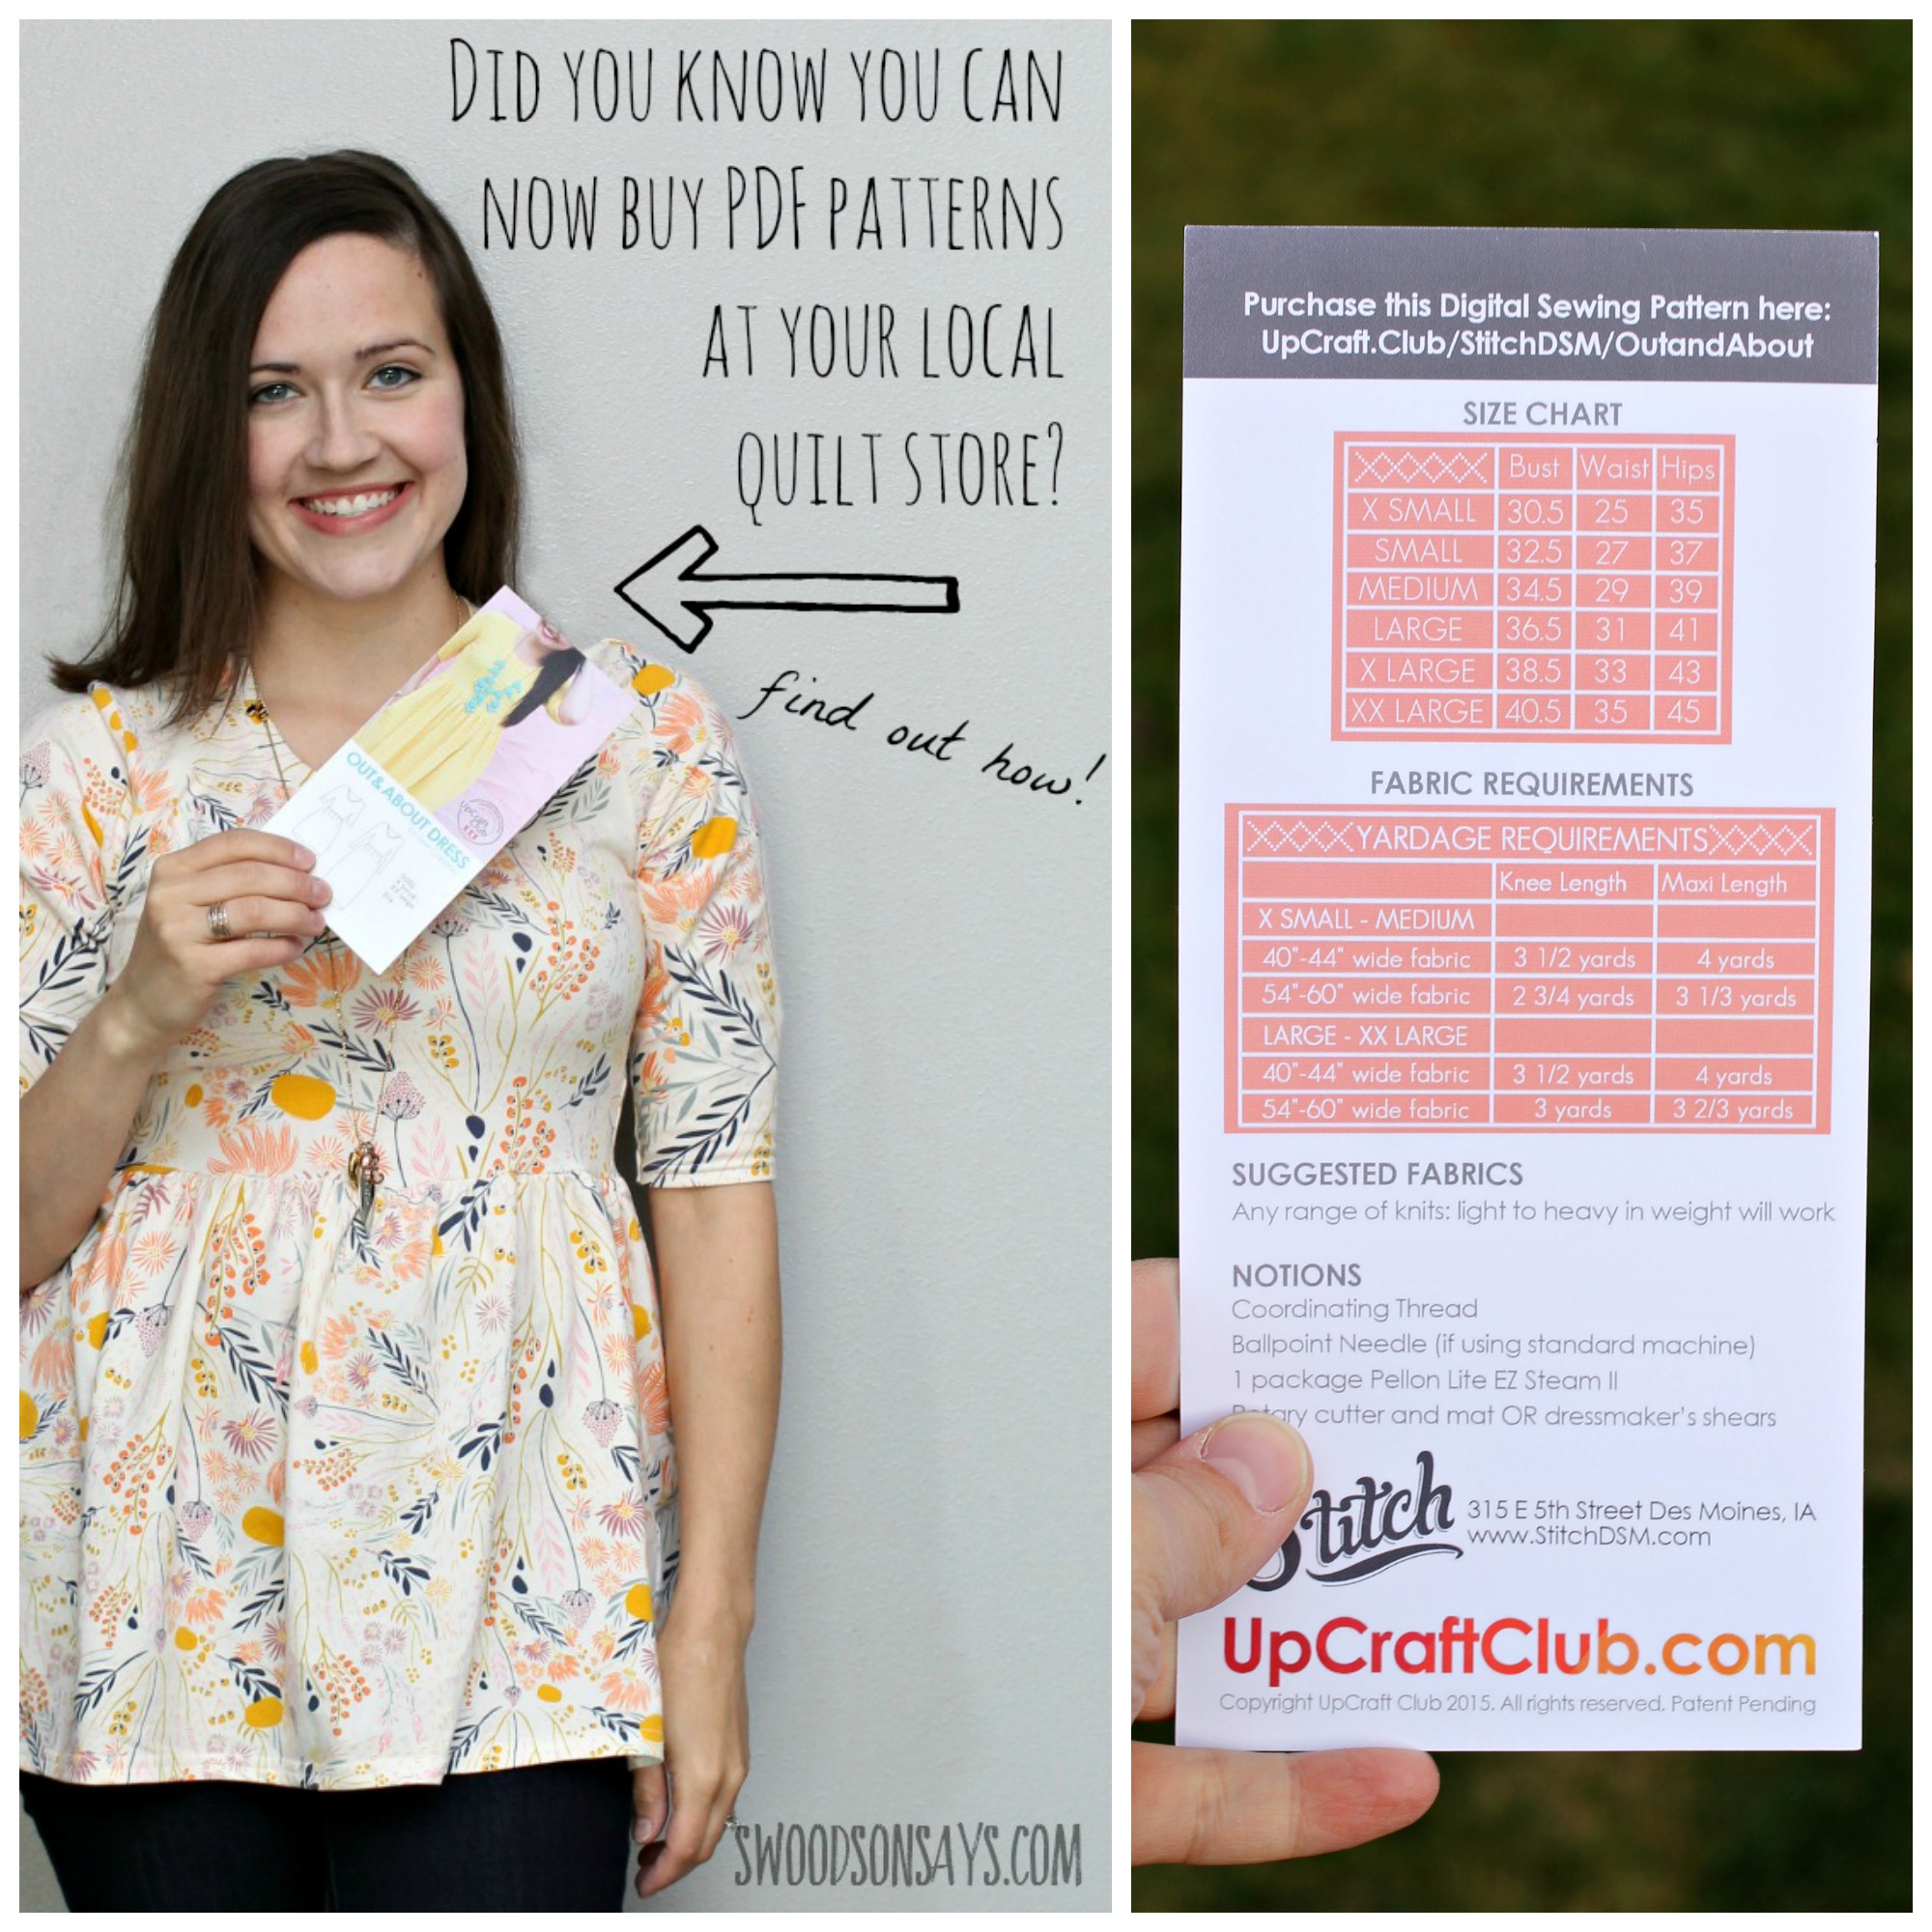 PDF Sewing Pattern Cards from UpCraft Club